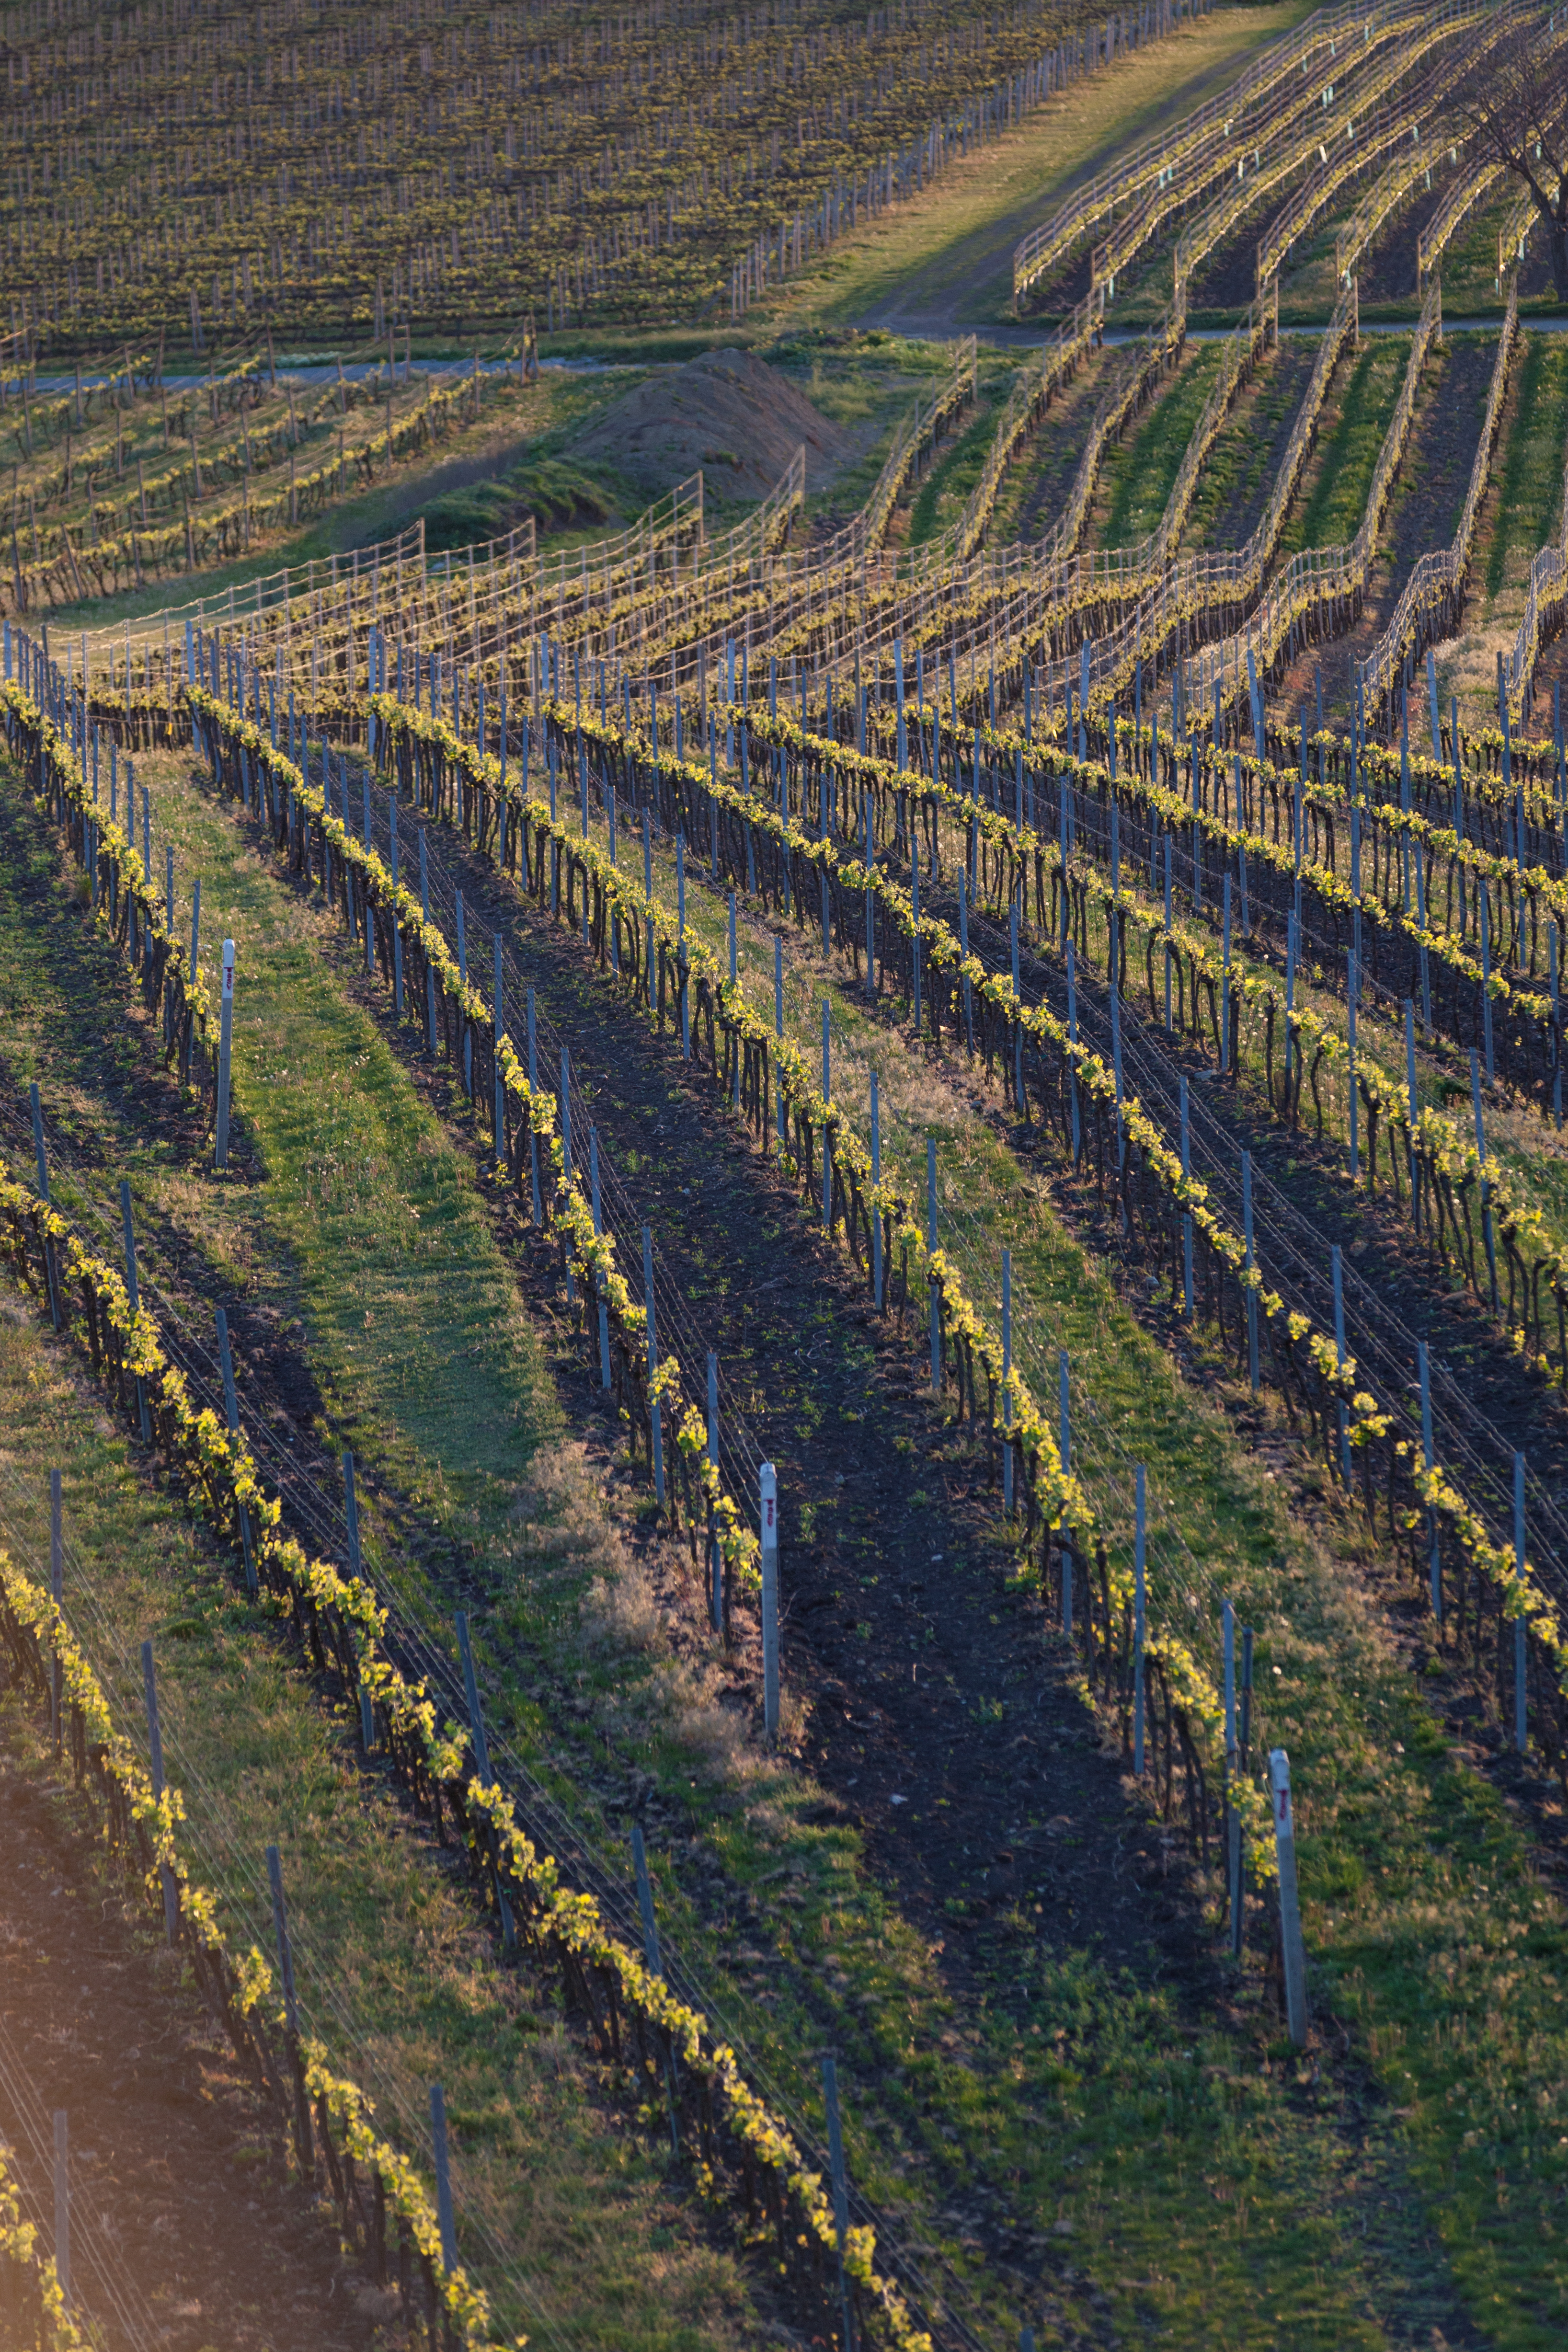 overhead view of vineyards in the Czech Republic